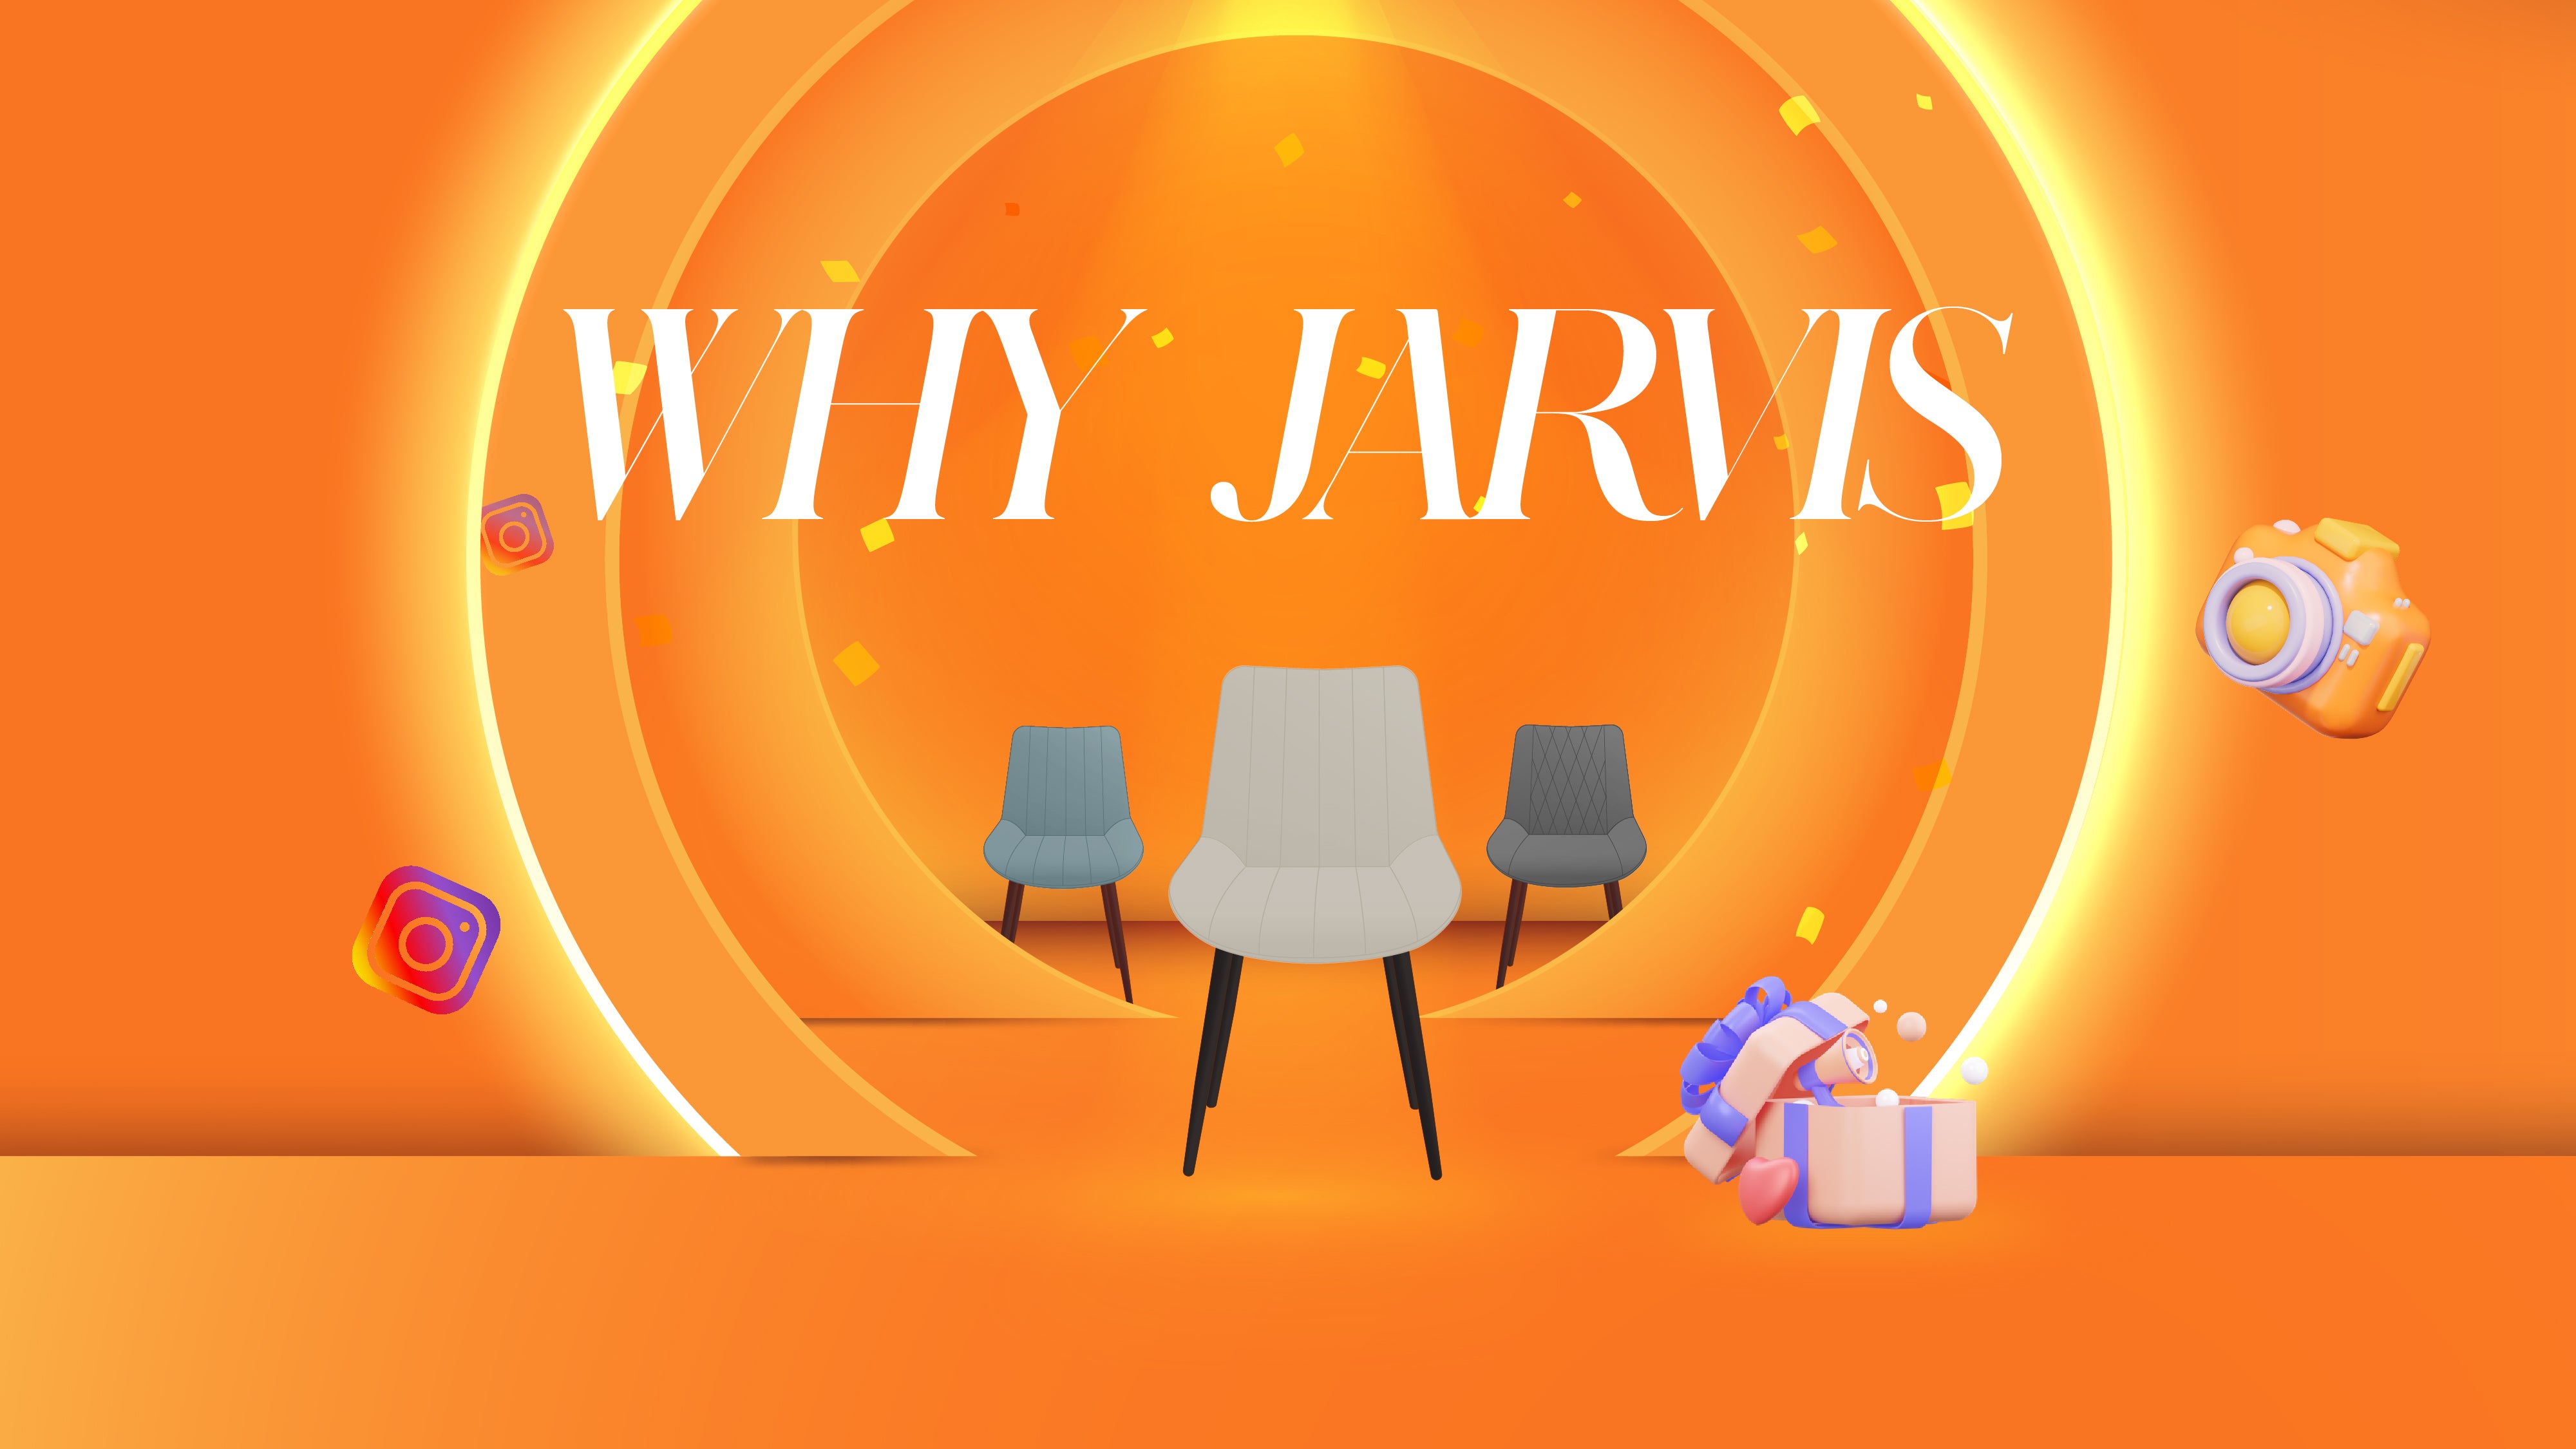 [Ofcasa Photo Hunting] Get Free Gifts by Sharing photo of Jarvis Chair!